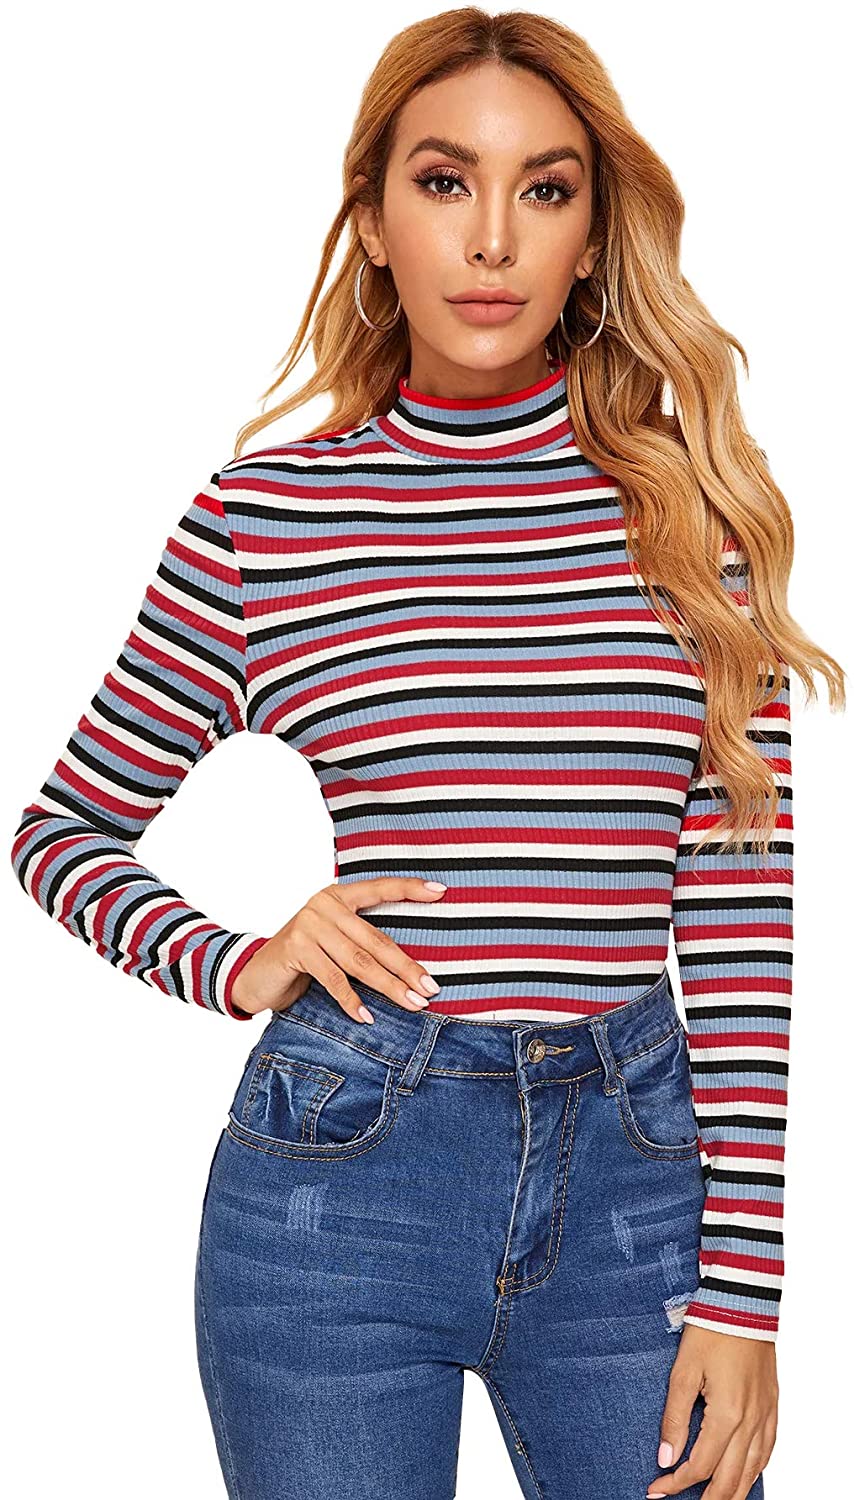 Floerns Women's High Neck Long Sleeve Slim Fit Stretch Striped T-Shirts 